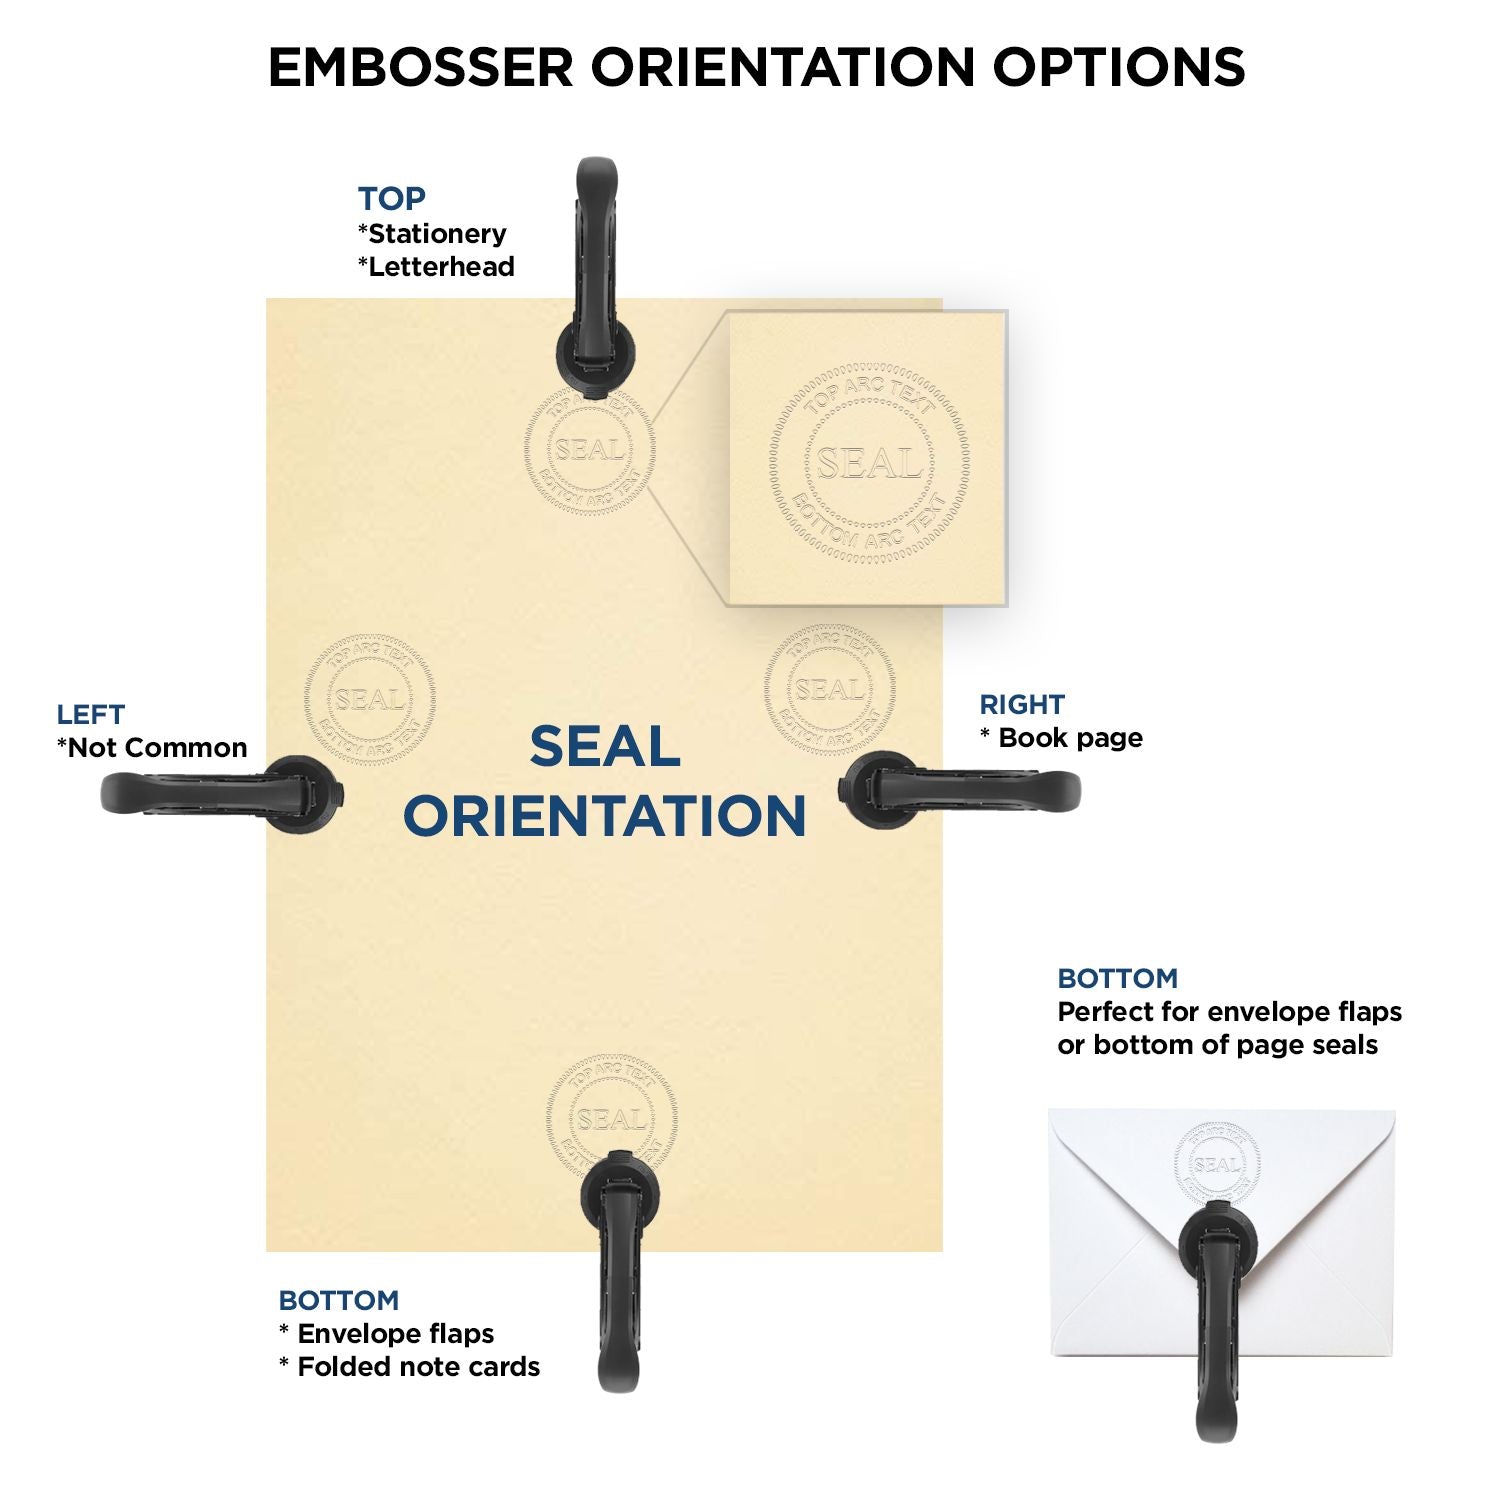 An infographic for the Extended Long Reach Virginia Surveyor Embosser showing embosser orientation, this is showing examples of a top, bottom, right and left insert.